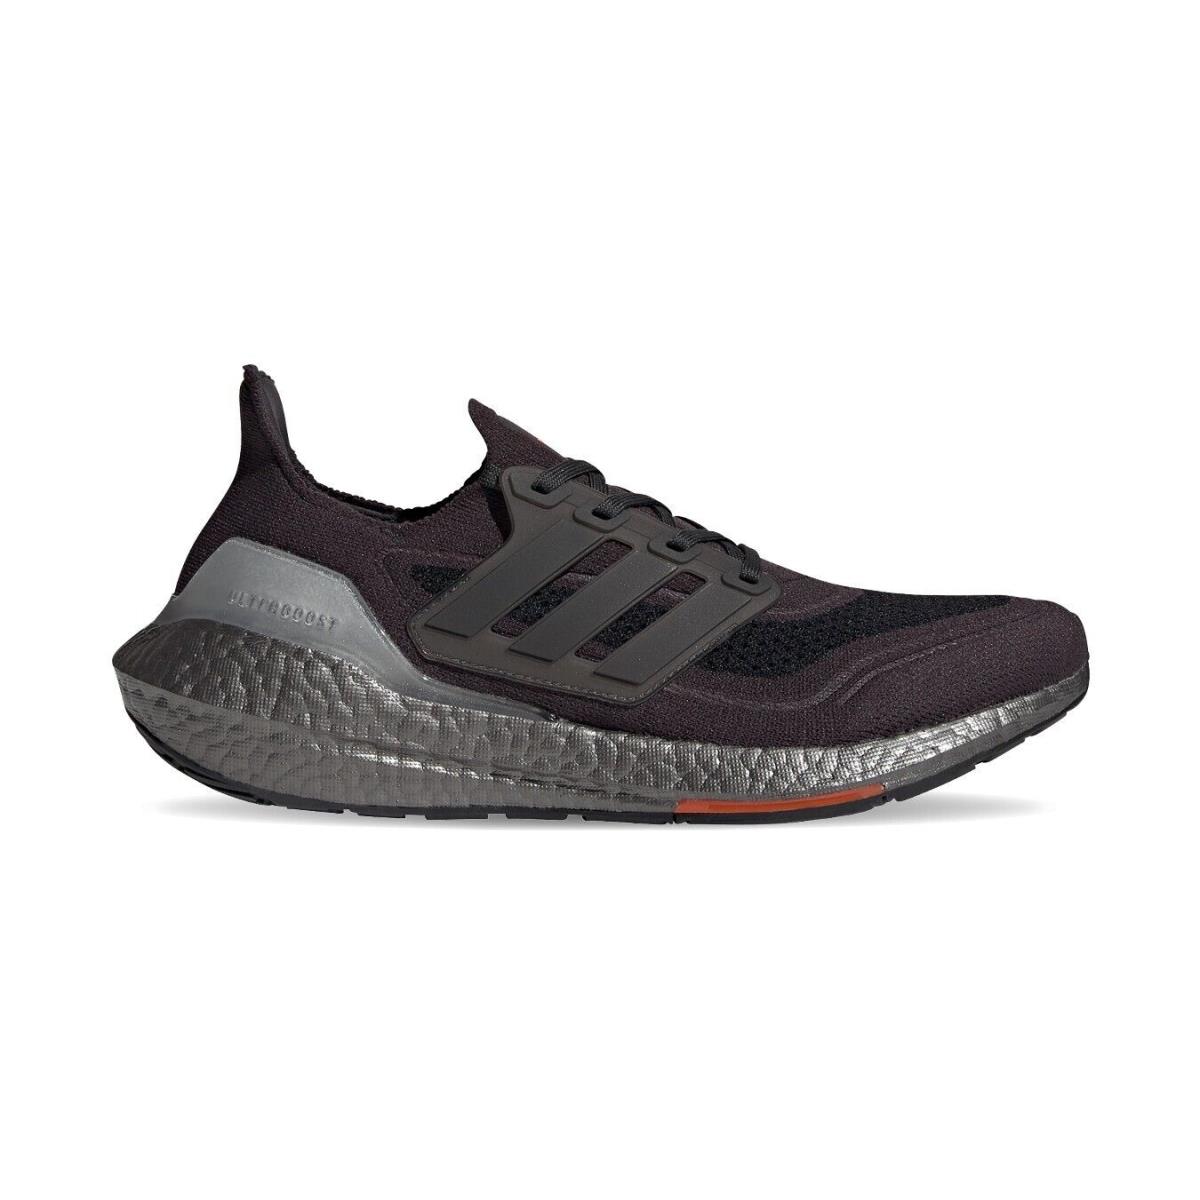 Adidas Ultraboost 21 Shoes Size 6.5M - Carbon / Carbon / Solar Red